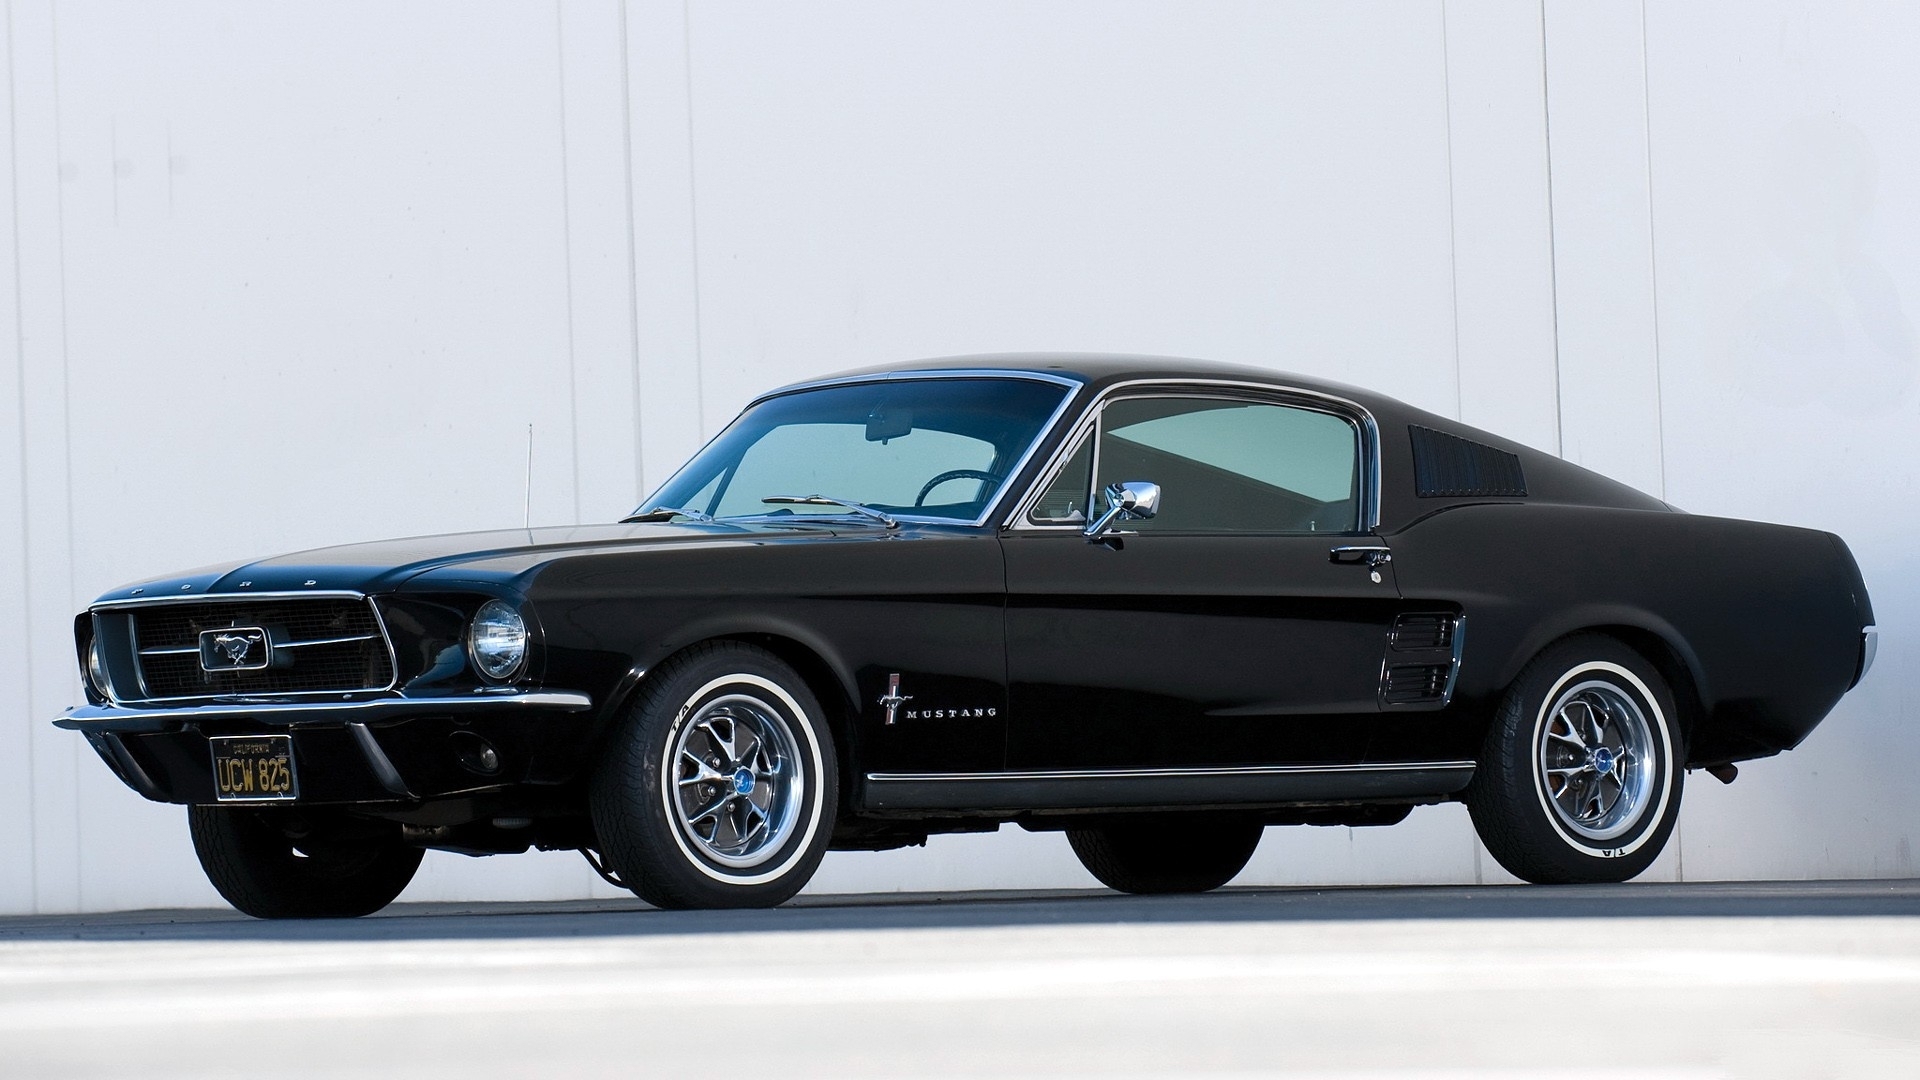 Ford Mustang Classic Cars Wallpaper   MixHD wallpapers 1920x1080